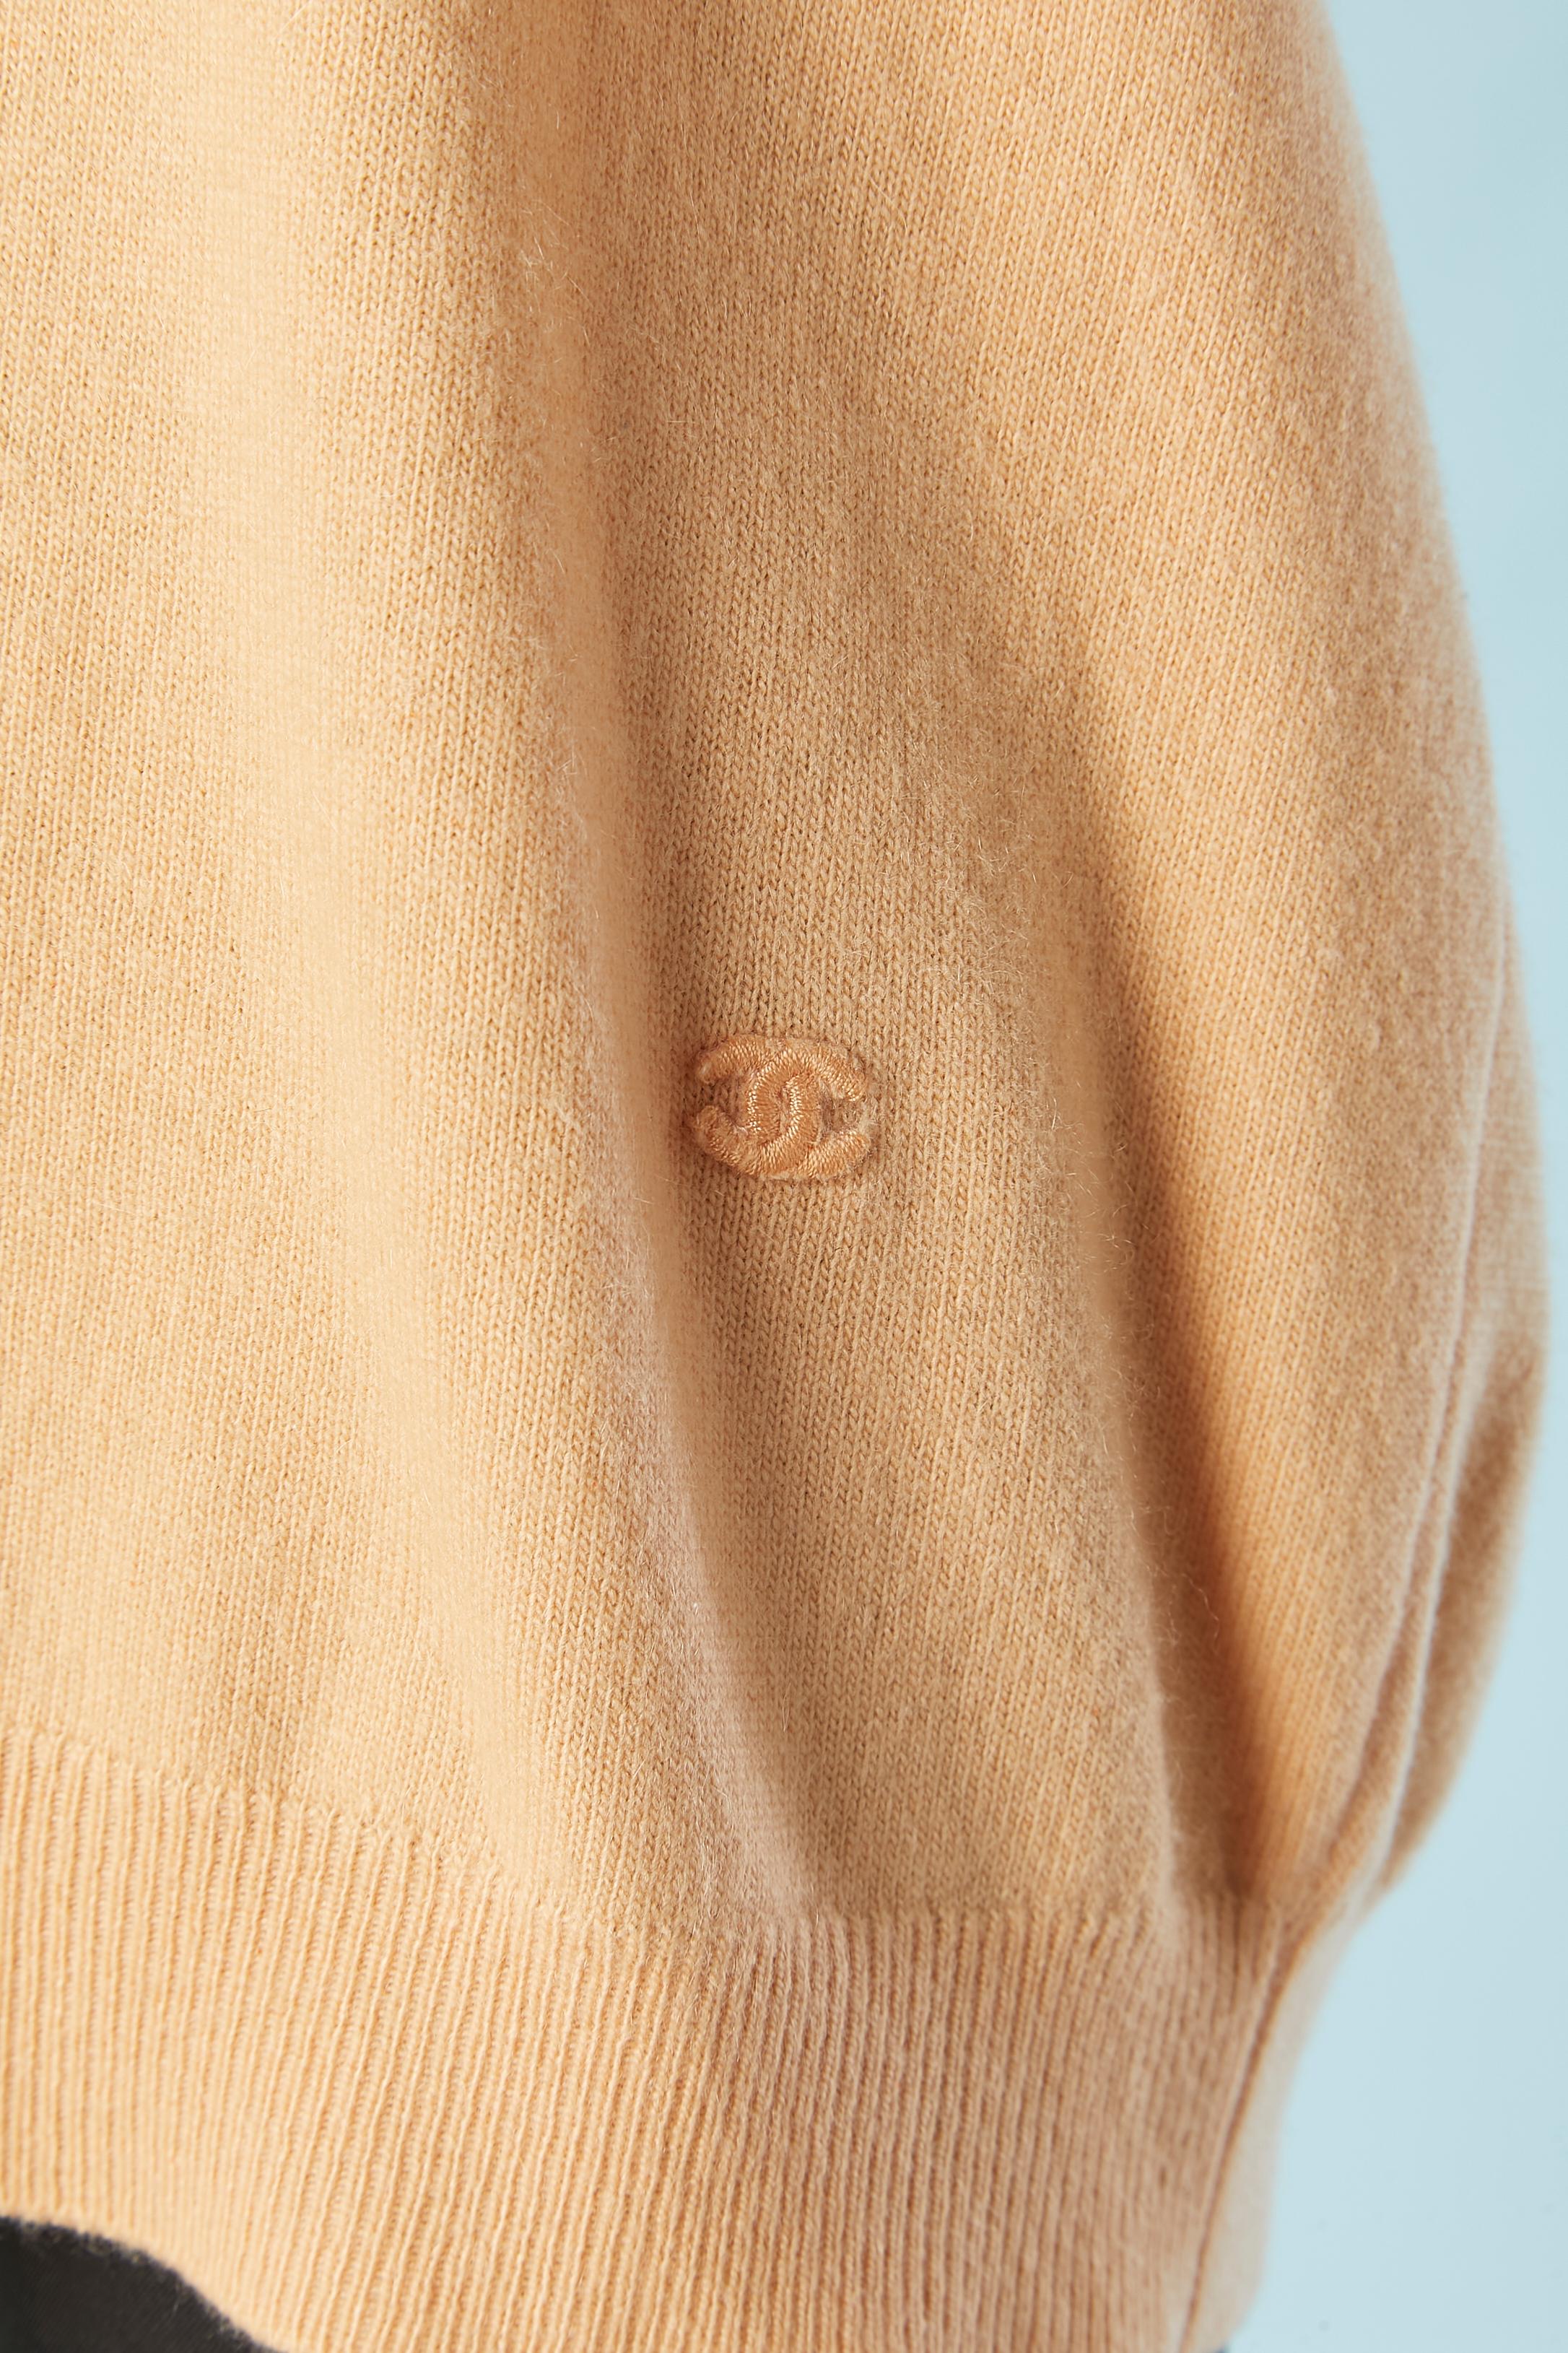 Salmon pink cashmere sweater with short sleeves. One branded button on the top middle back. One tiny tone on to ne 